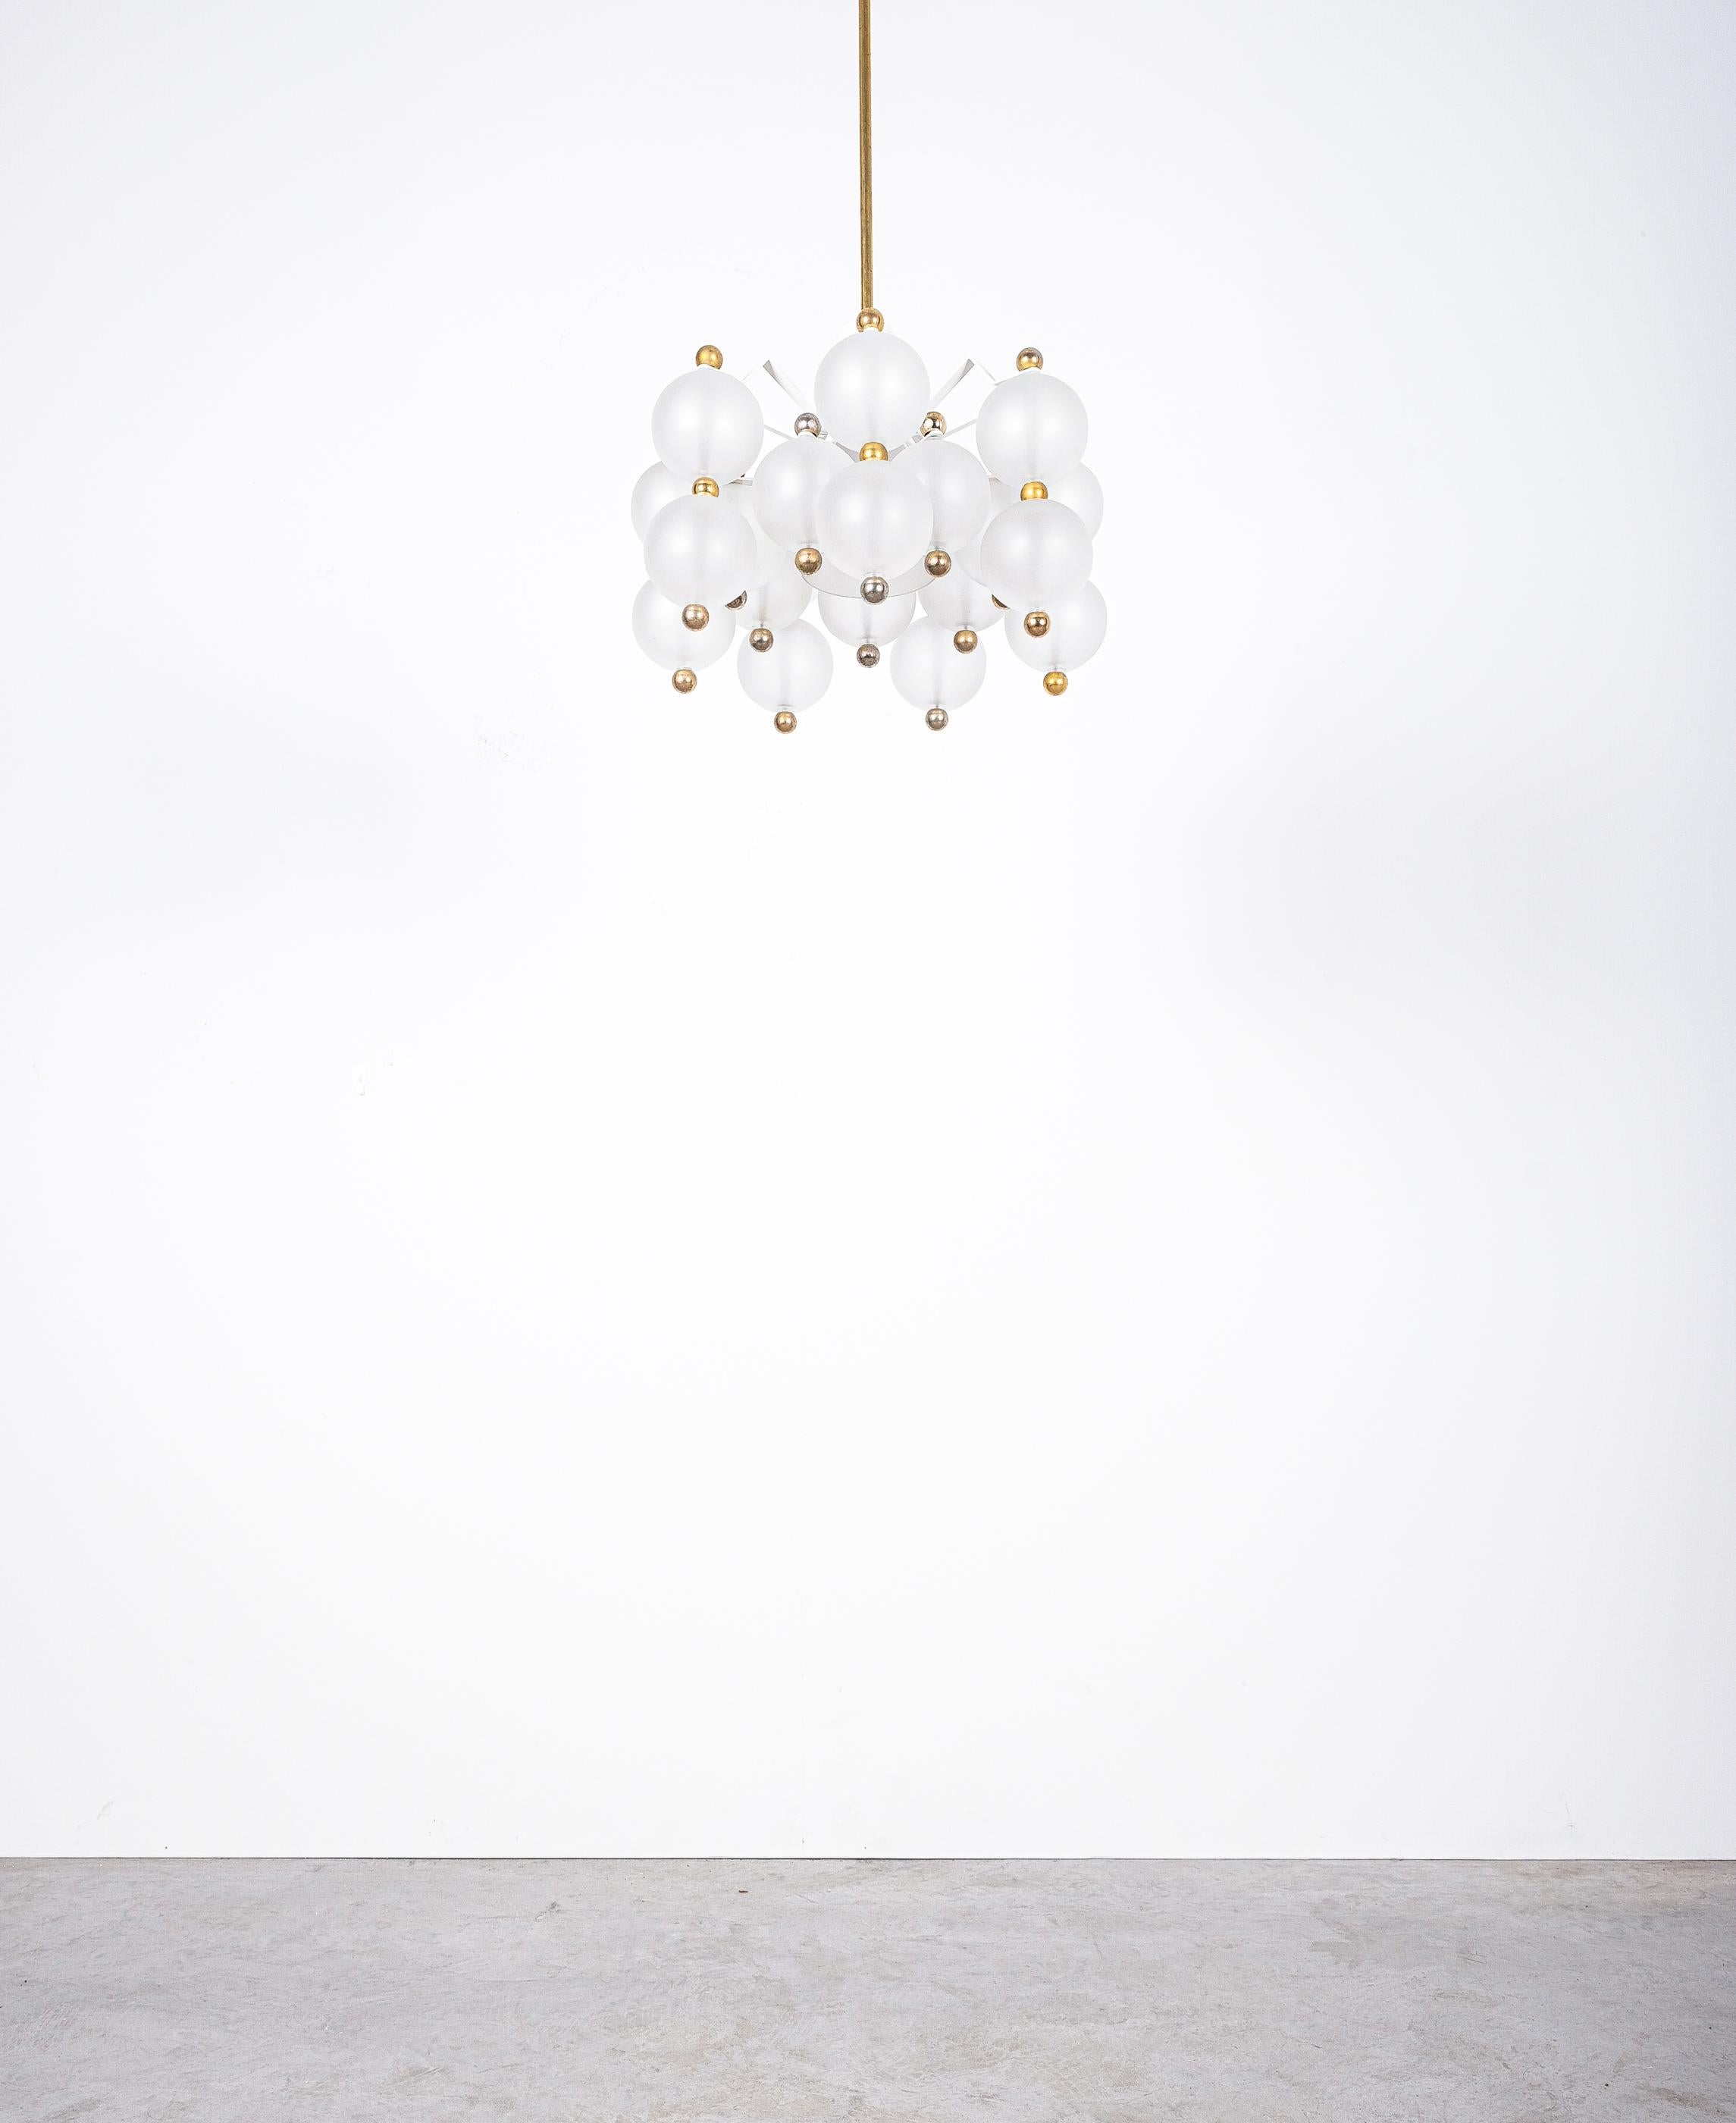 Mid-Century Modern Satin Glass Chandeliers '2' by Kinkeldey with Gold Knobs, circa 1970 For Sale